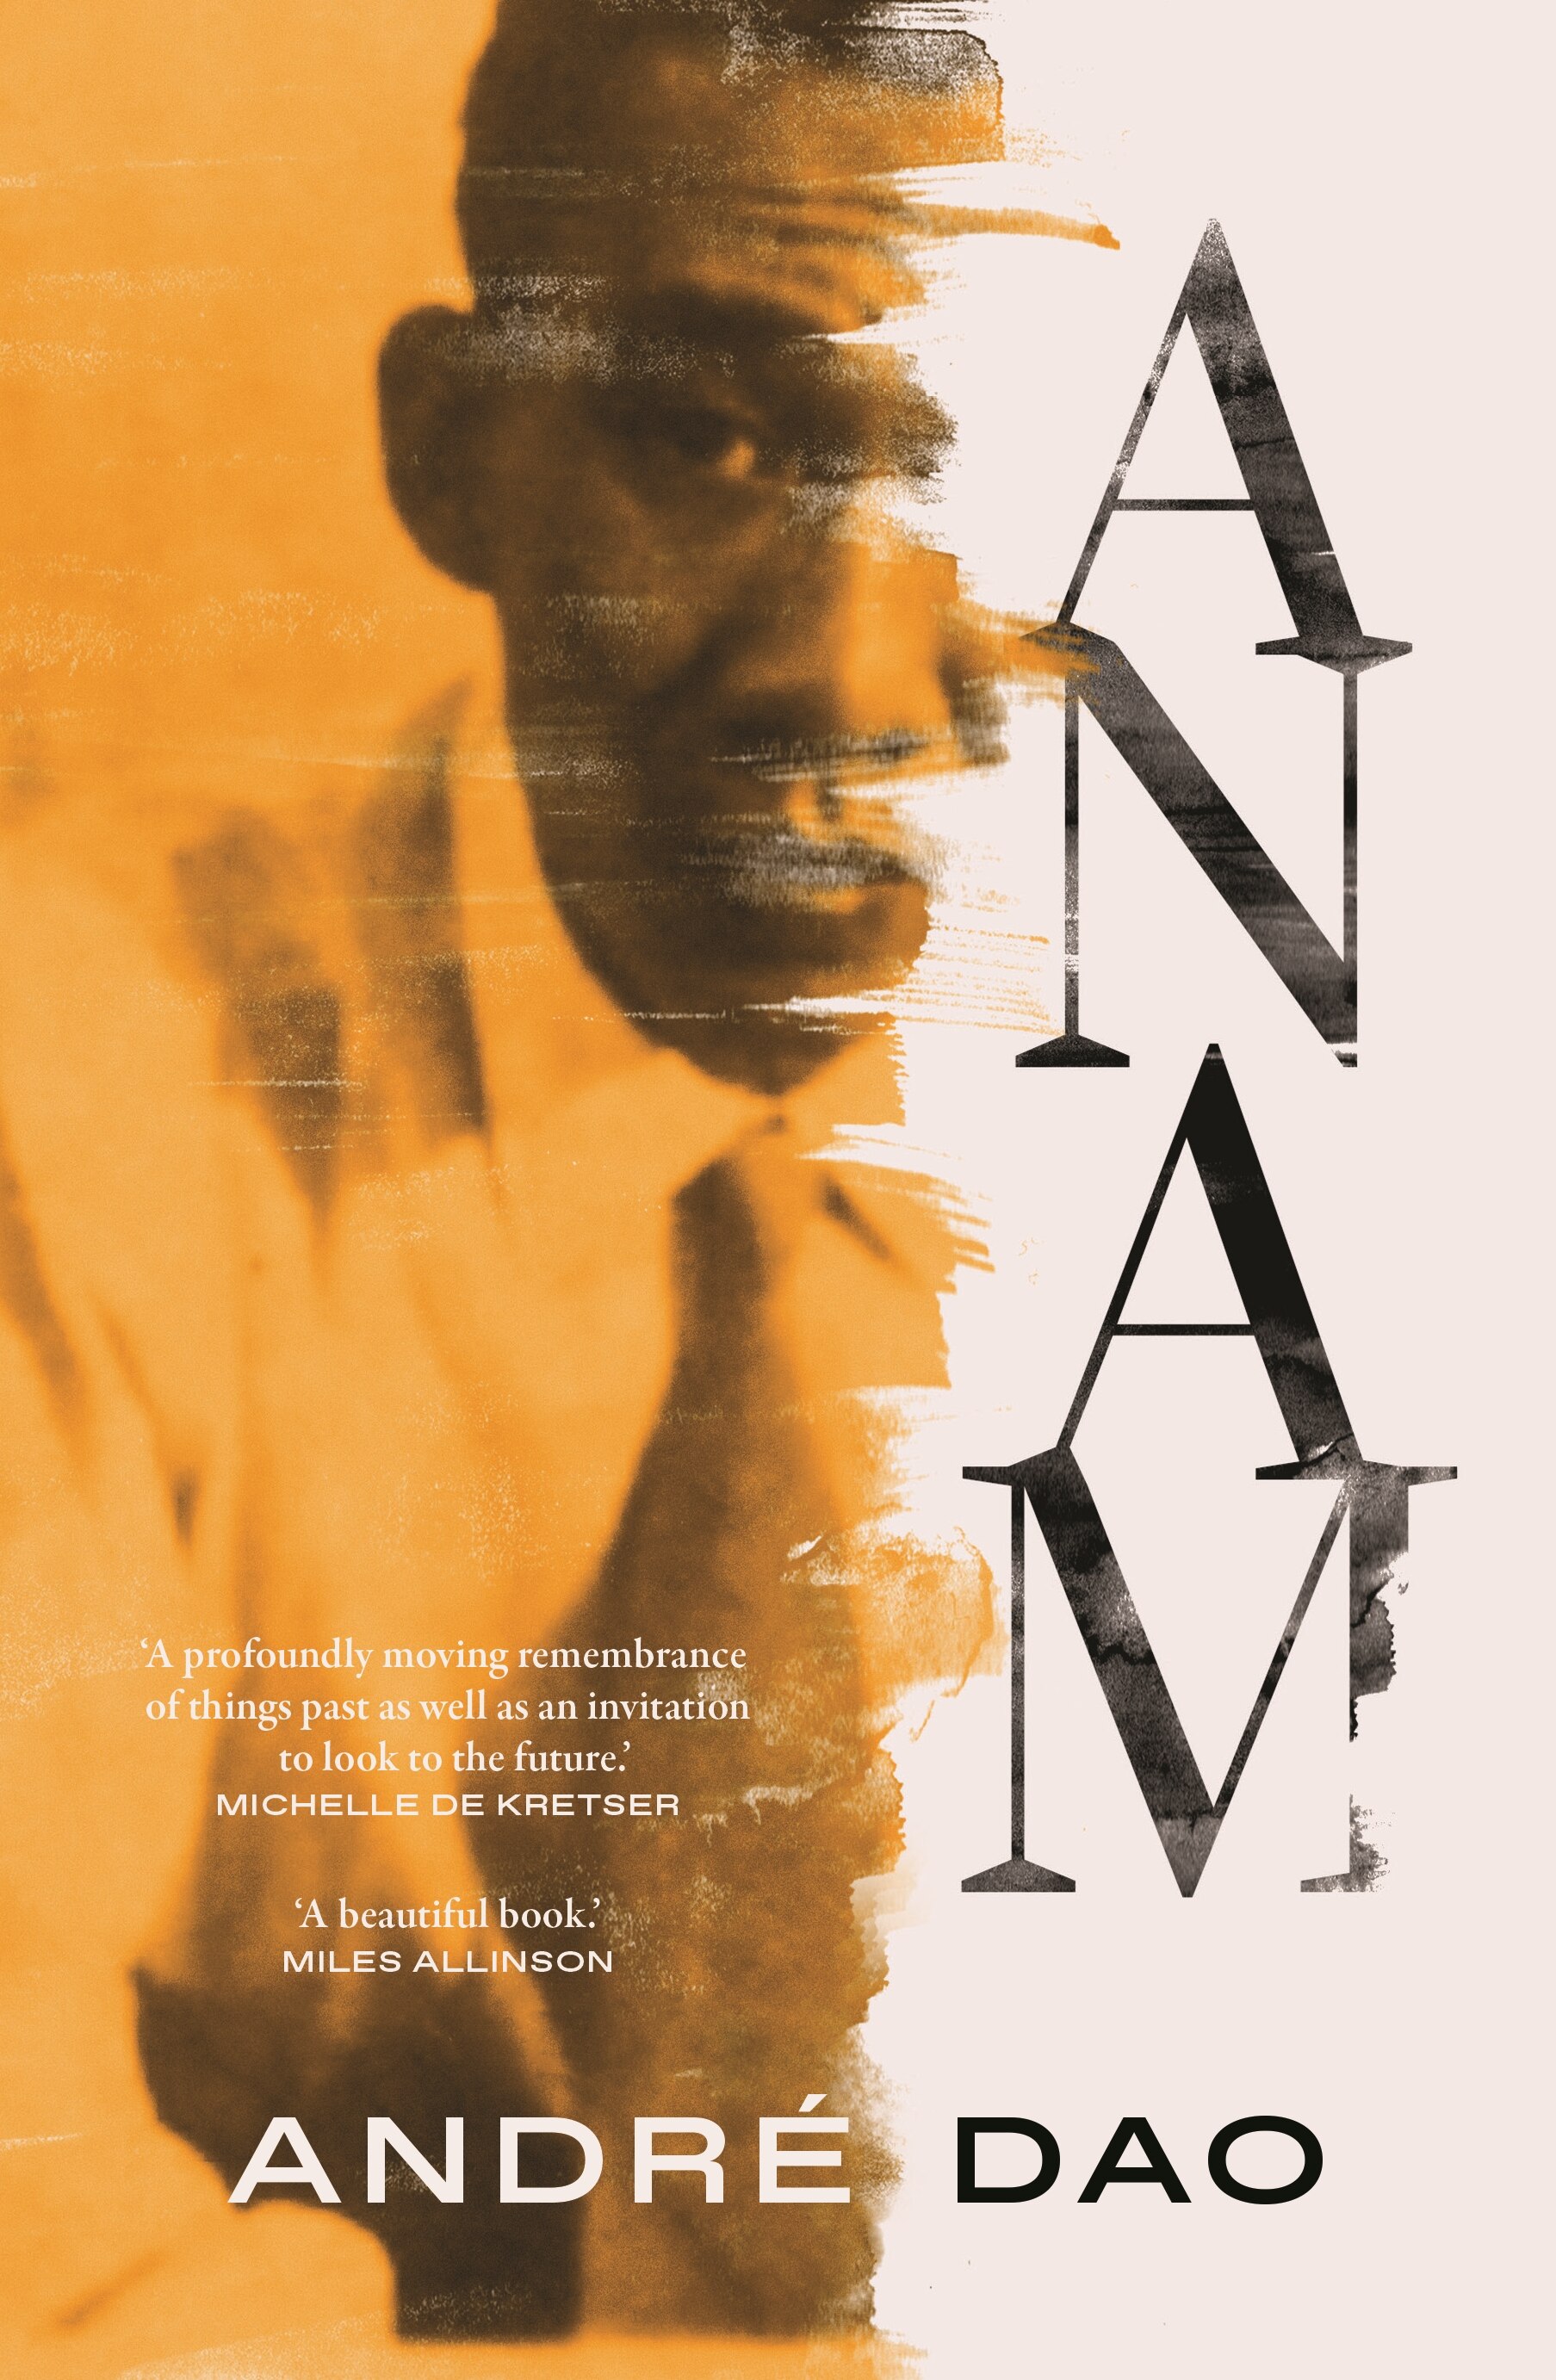 A book cover showing a black and white photo, overlaid with orange, of a man wearing a tie and shirt, plus the title 